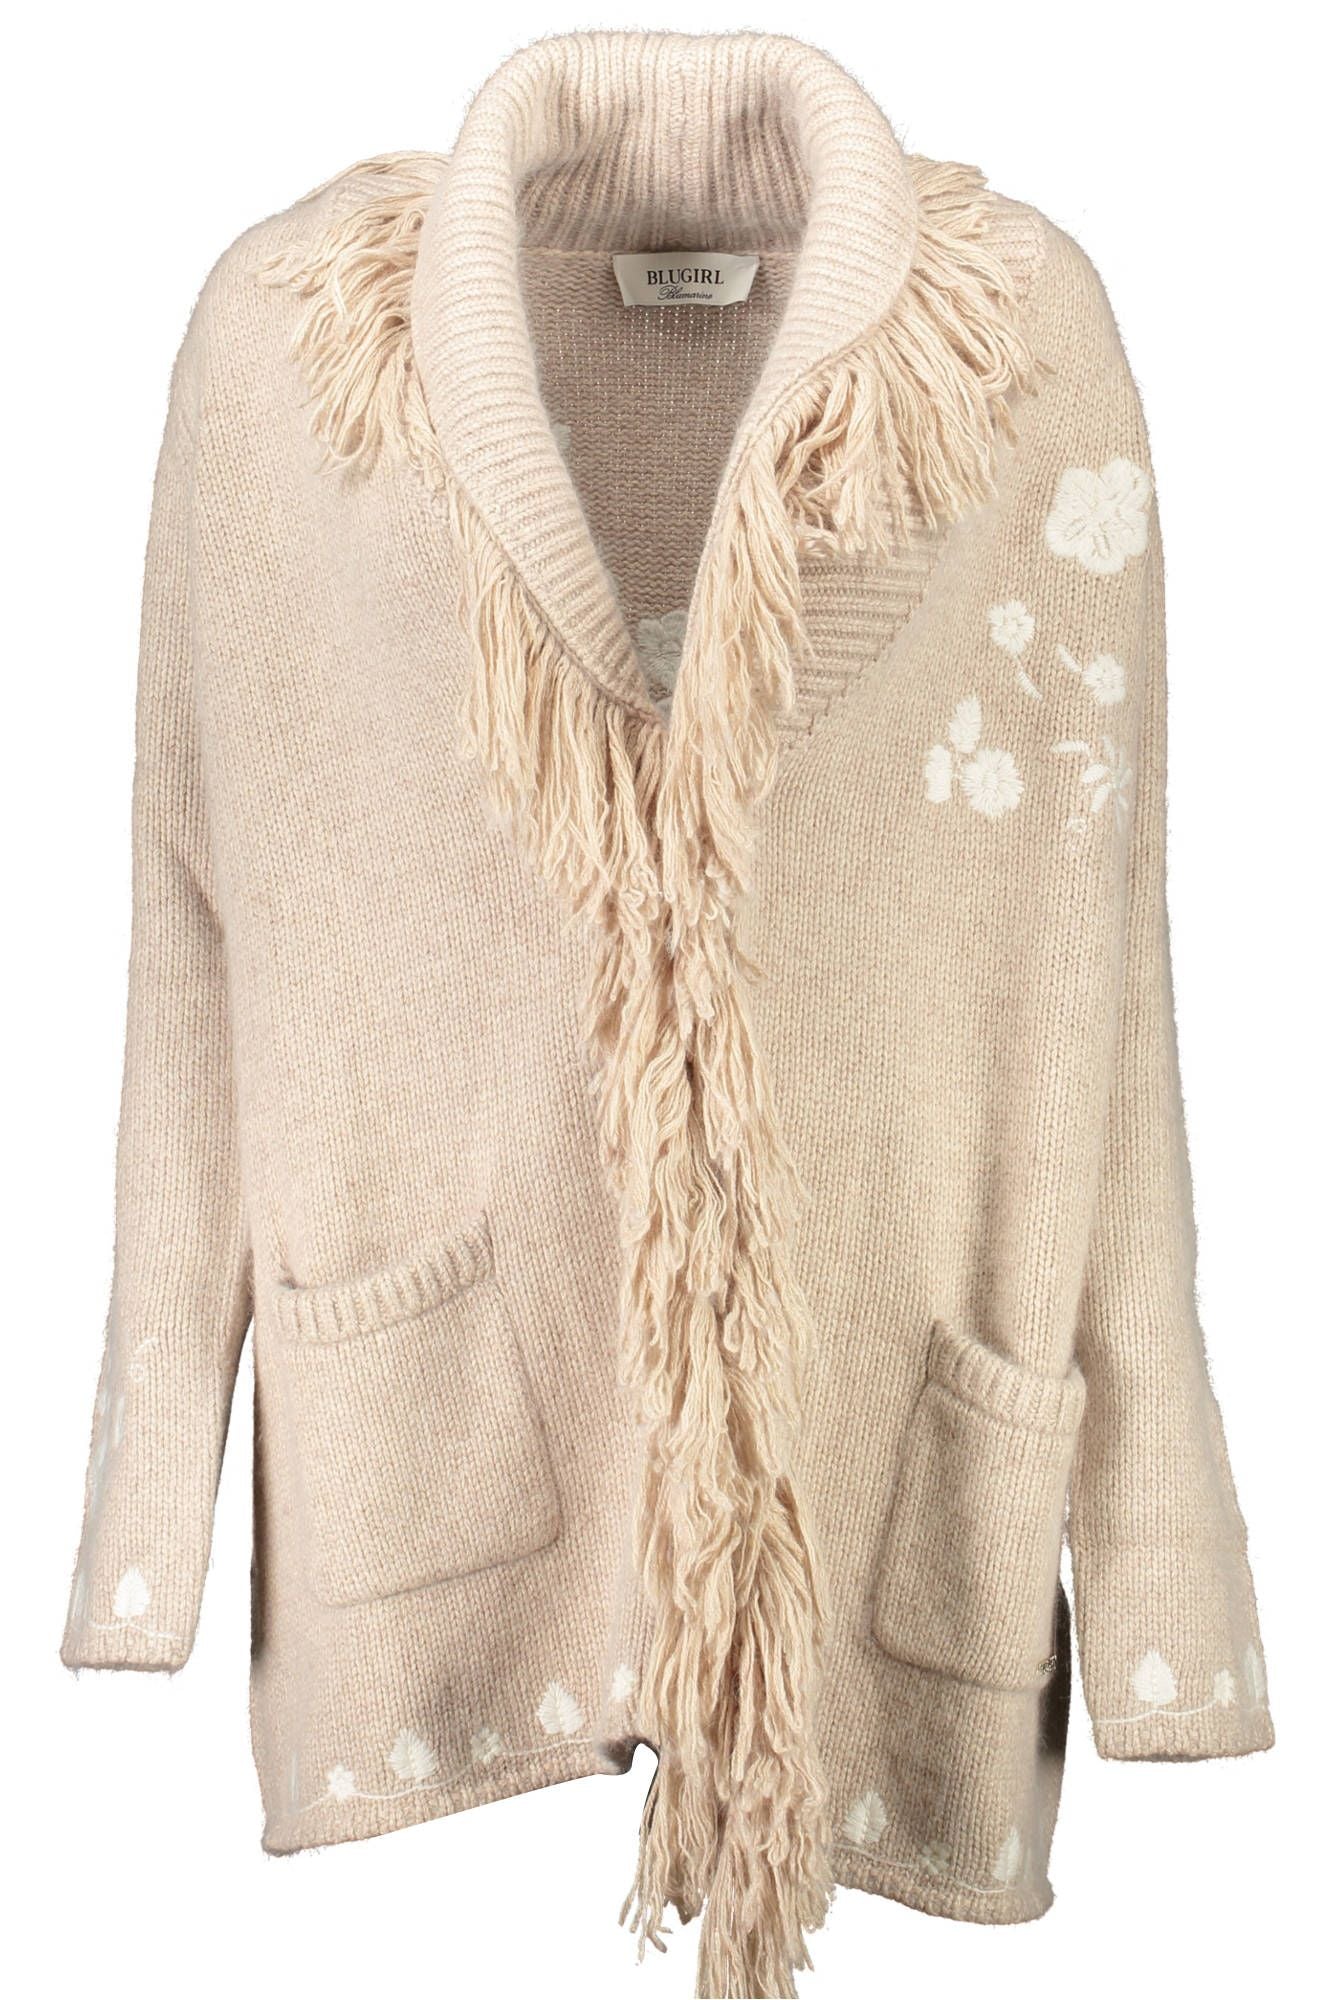 Chic Beige Wool Cardigan with Embroidery Details